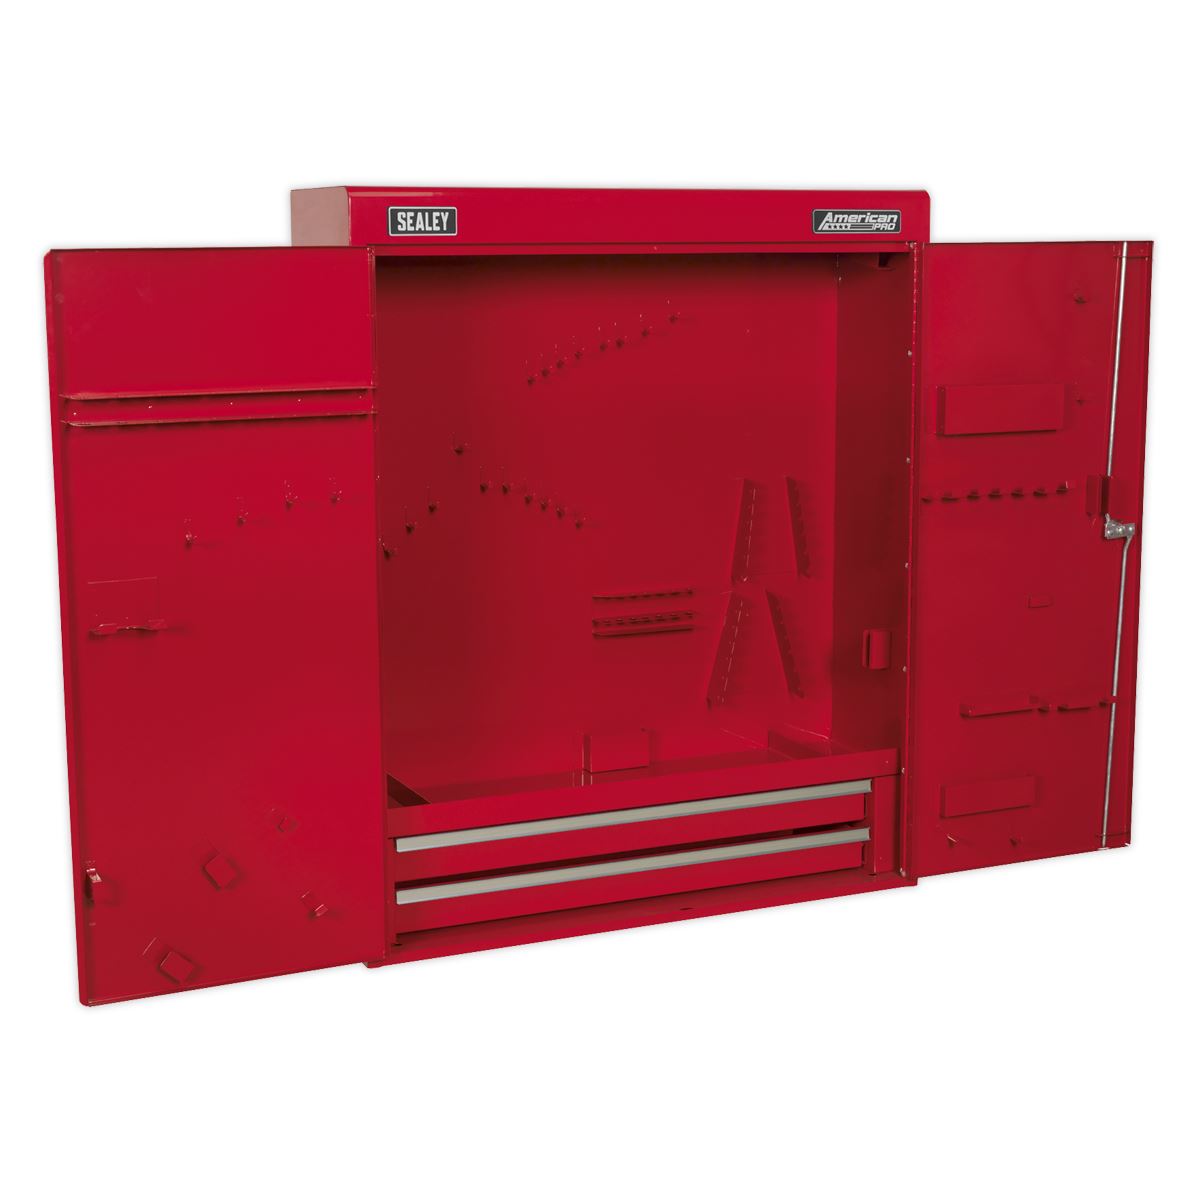 Sealey American Pro Wall Mounting Tool Cabinet with 2 Drawers